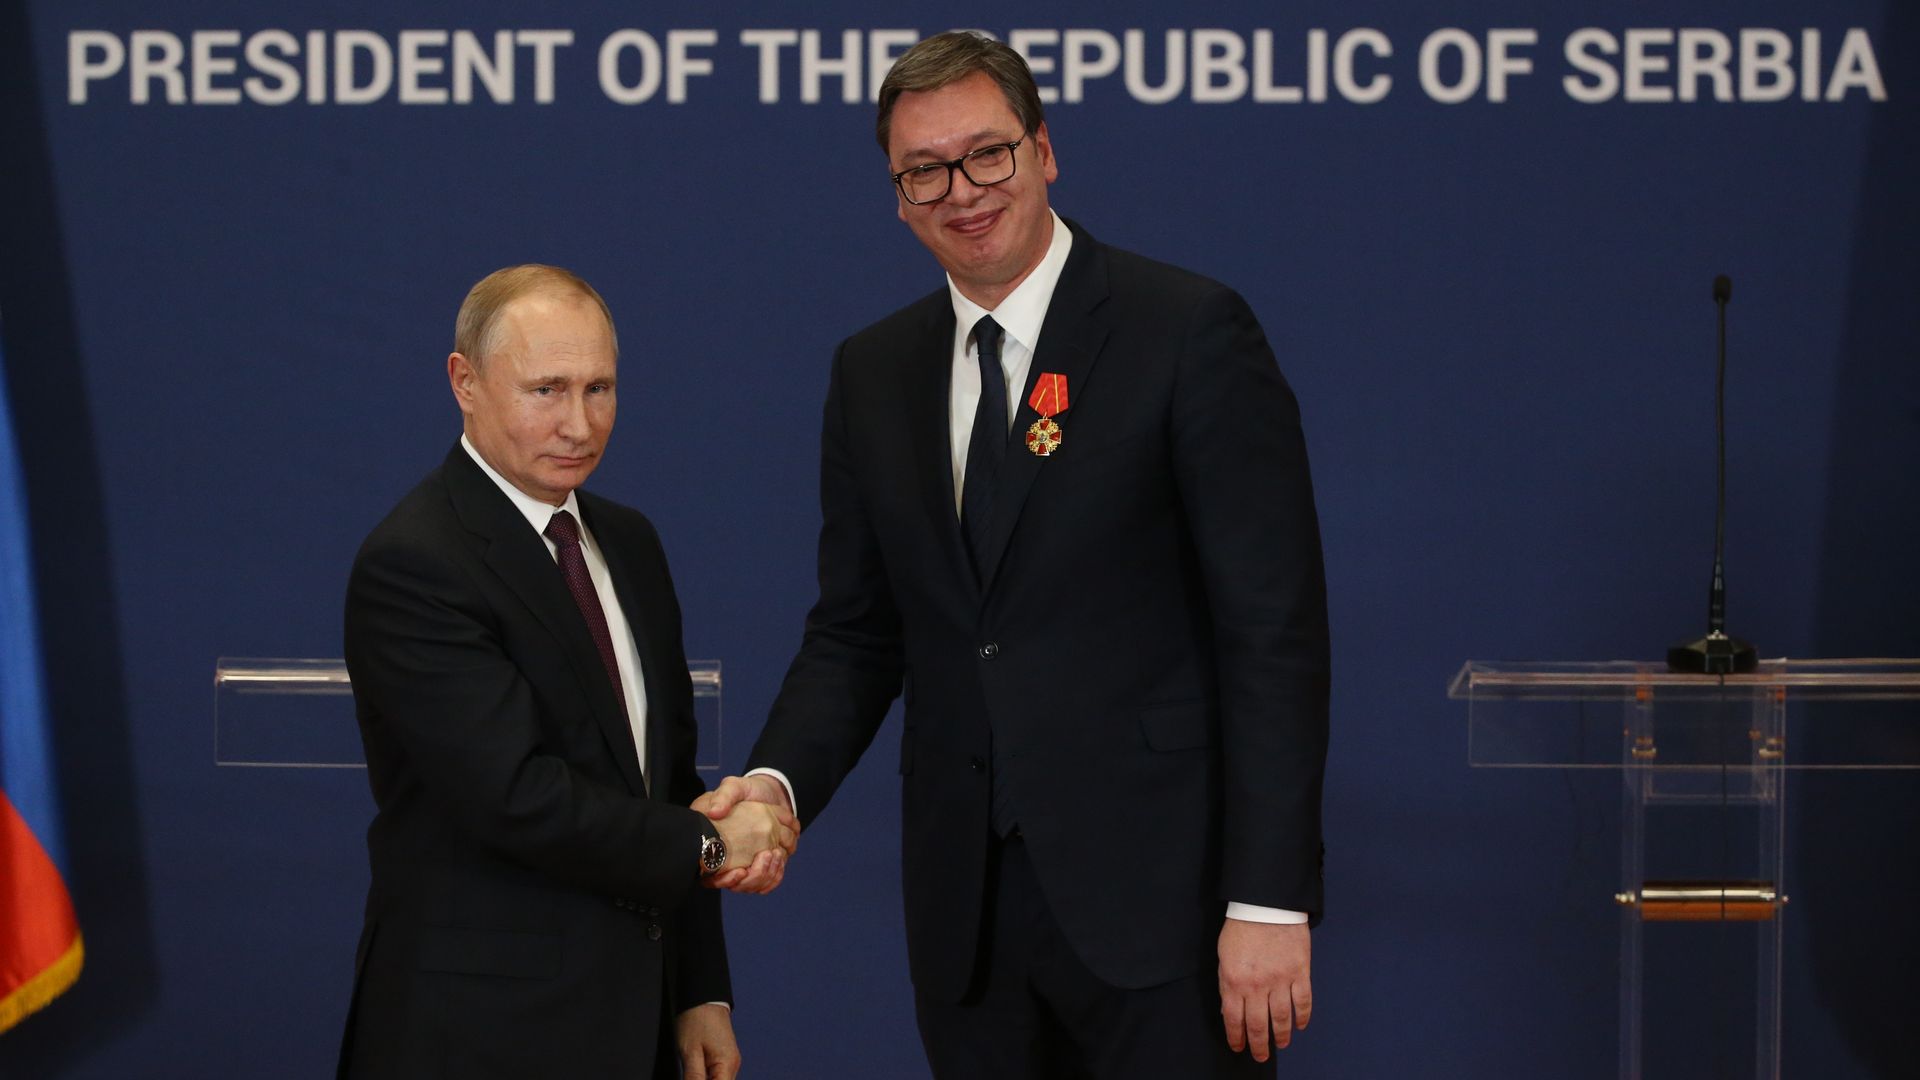 Russian President Vladimir Putin shakes hands with Serbian President Aleksandar Vucic during their meeting at the Presidential Administration on January 17, 2018 in Belgrade, Serbia. 